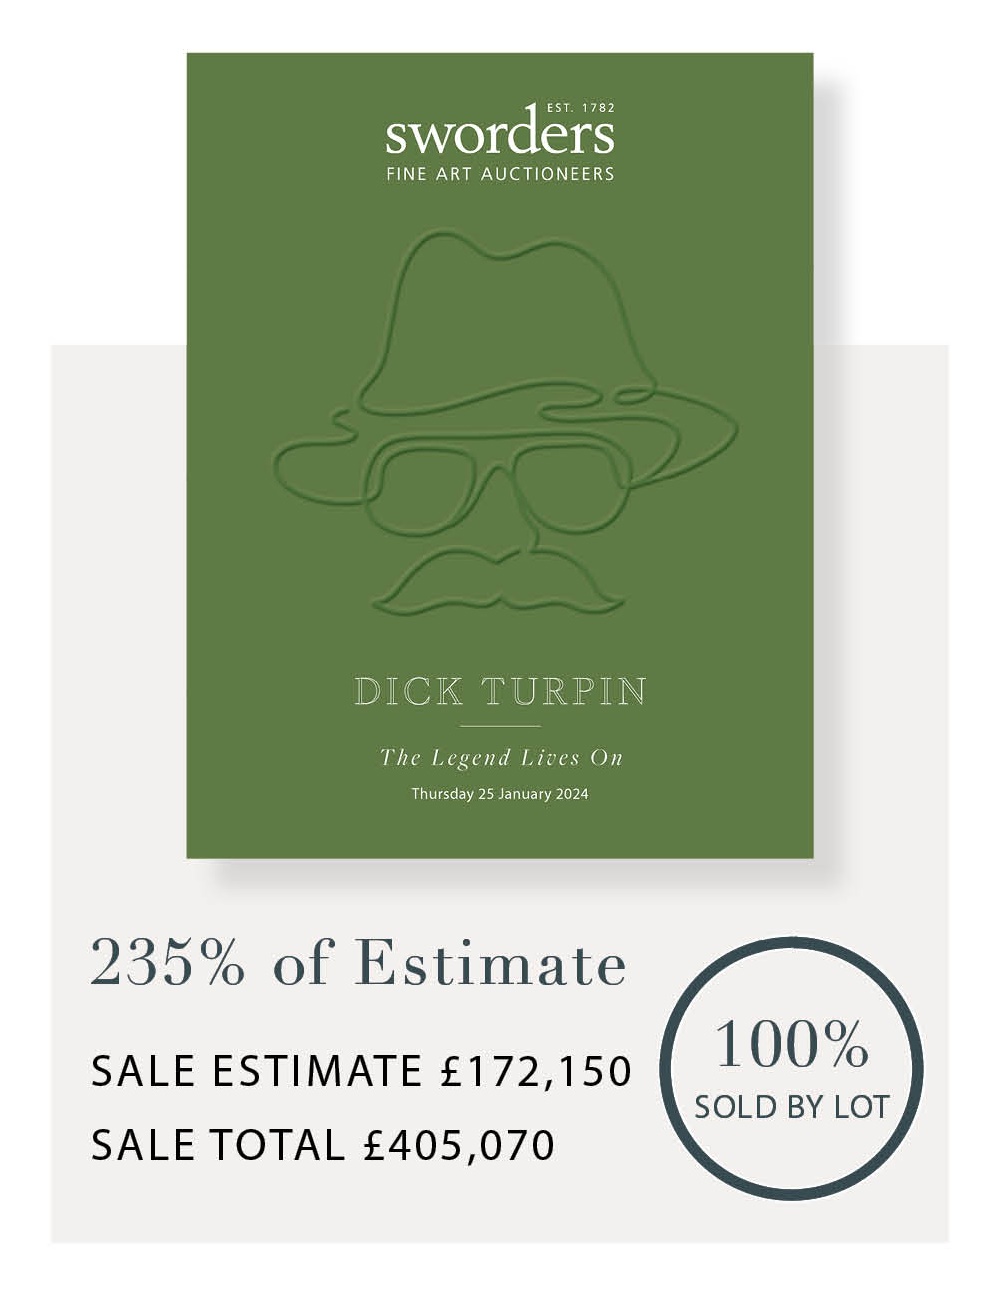 The Dick Turpin Collection